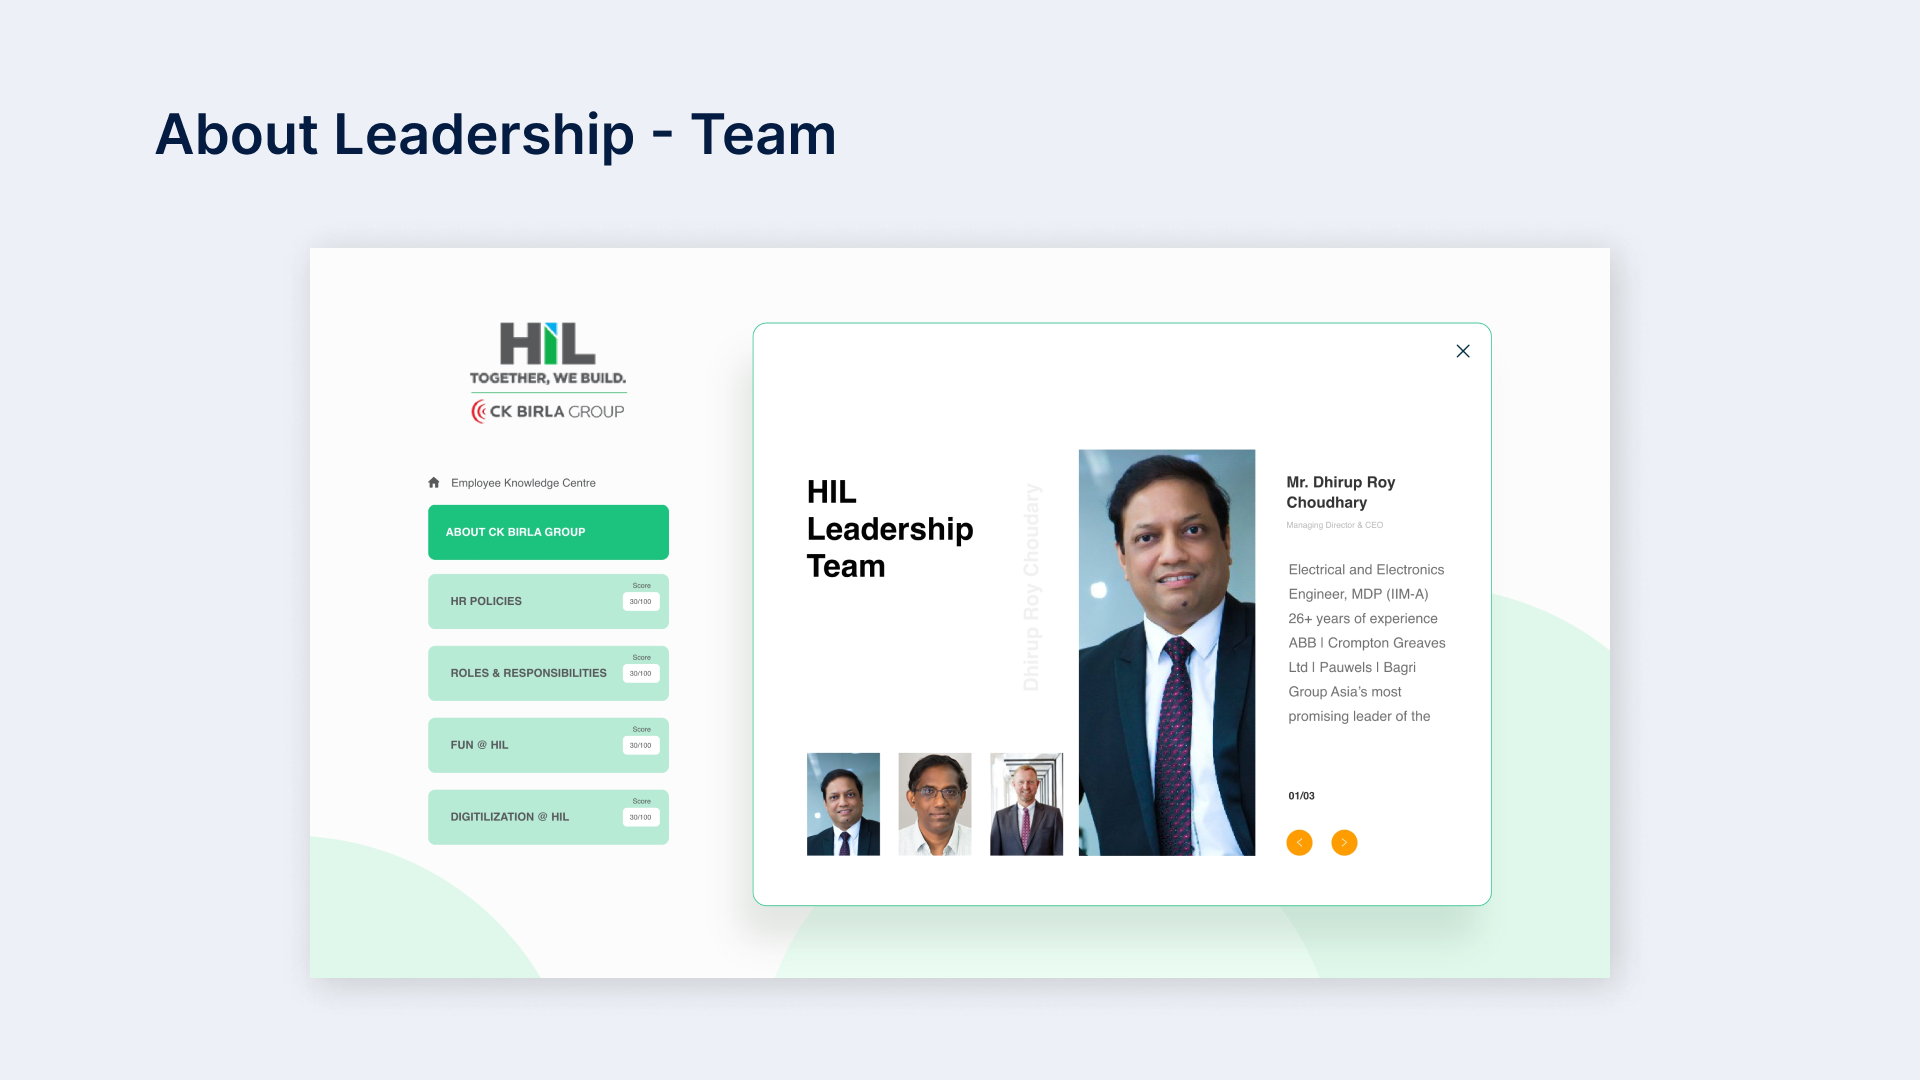 About Leadership - Team